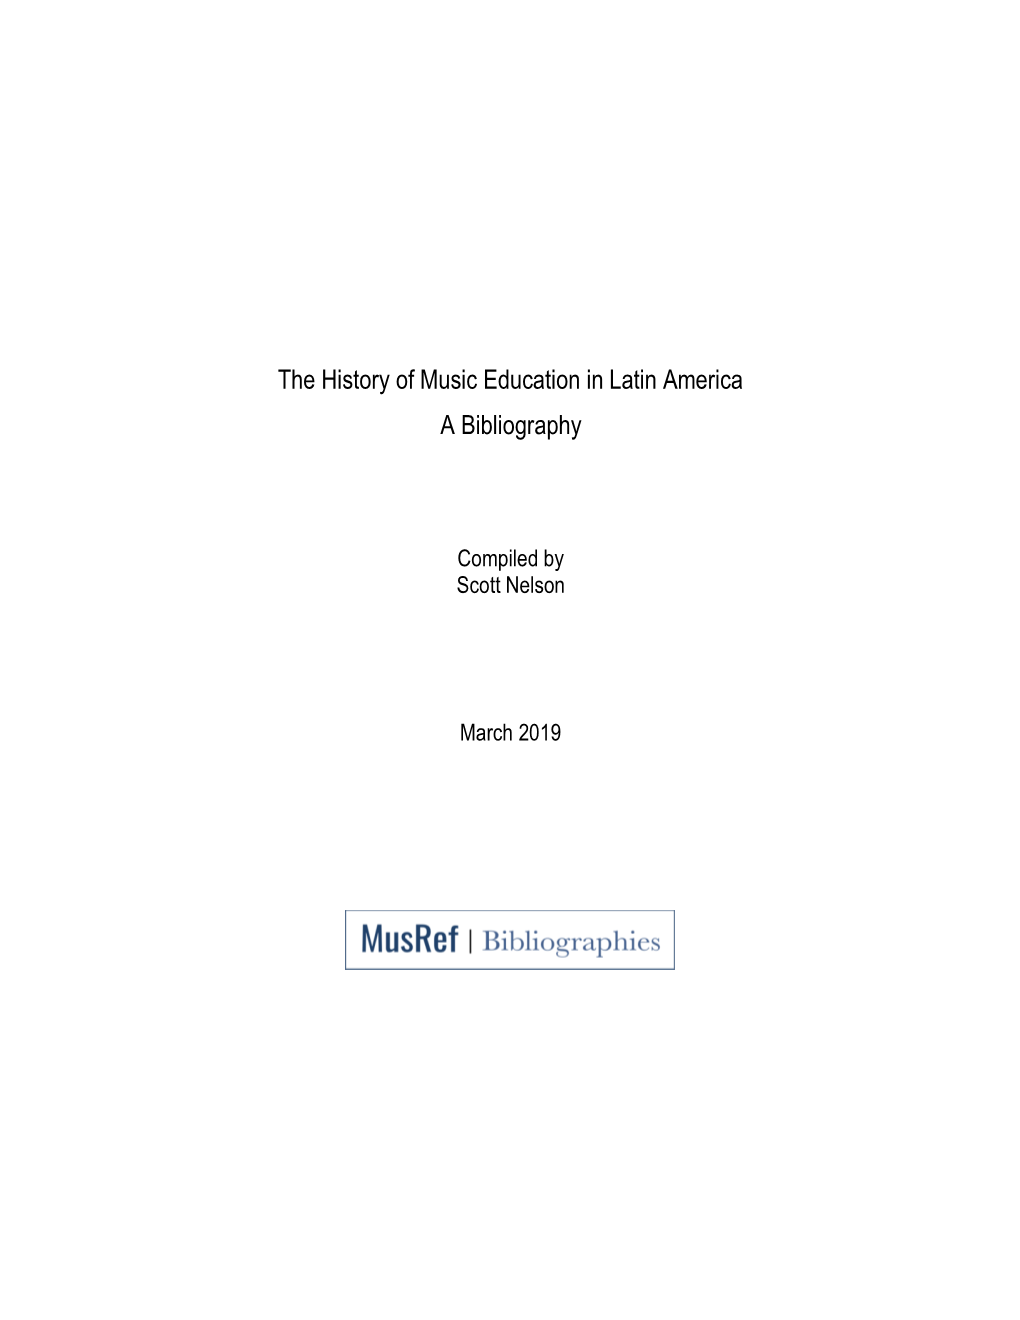 The History of Music Education in Latin America a Bibliography